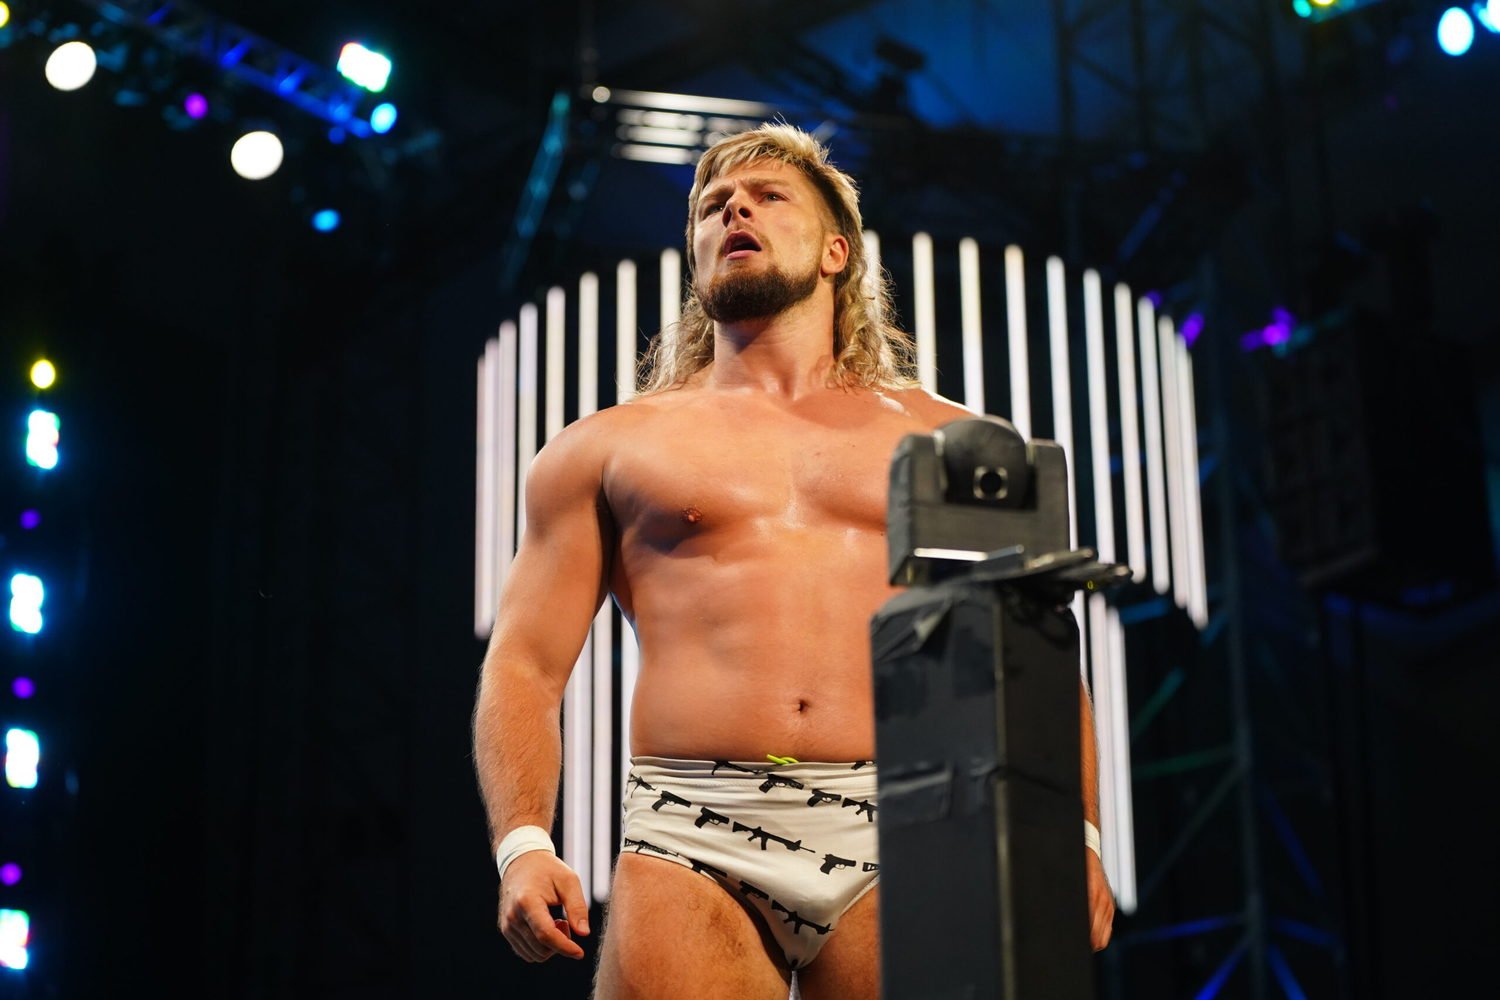 Report: Brian Pillman, Jr. exits AEW after contract expires - Cageside Seats